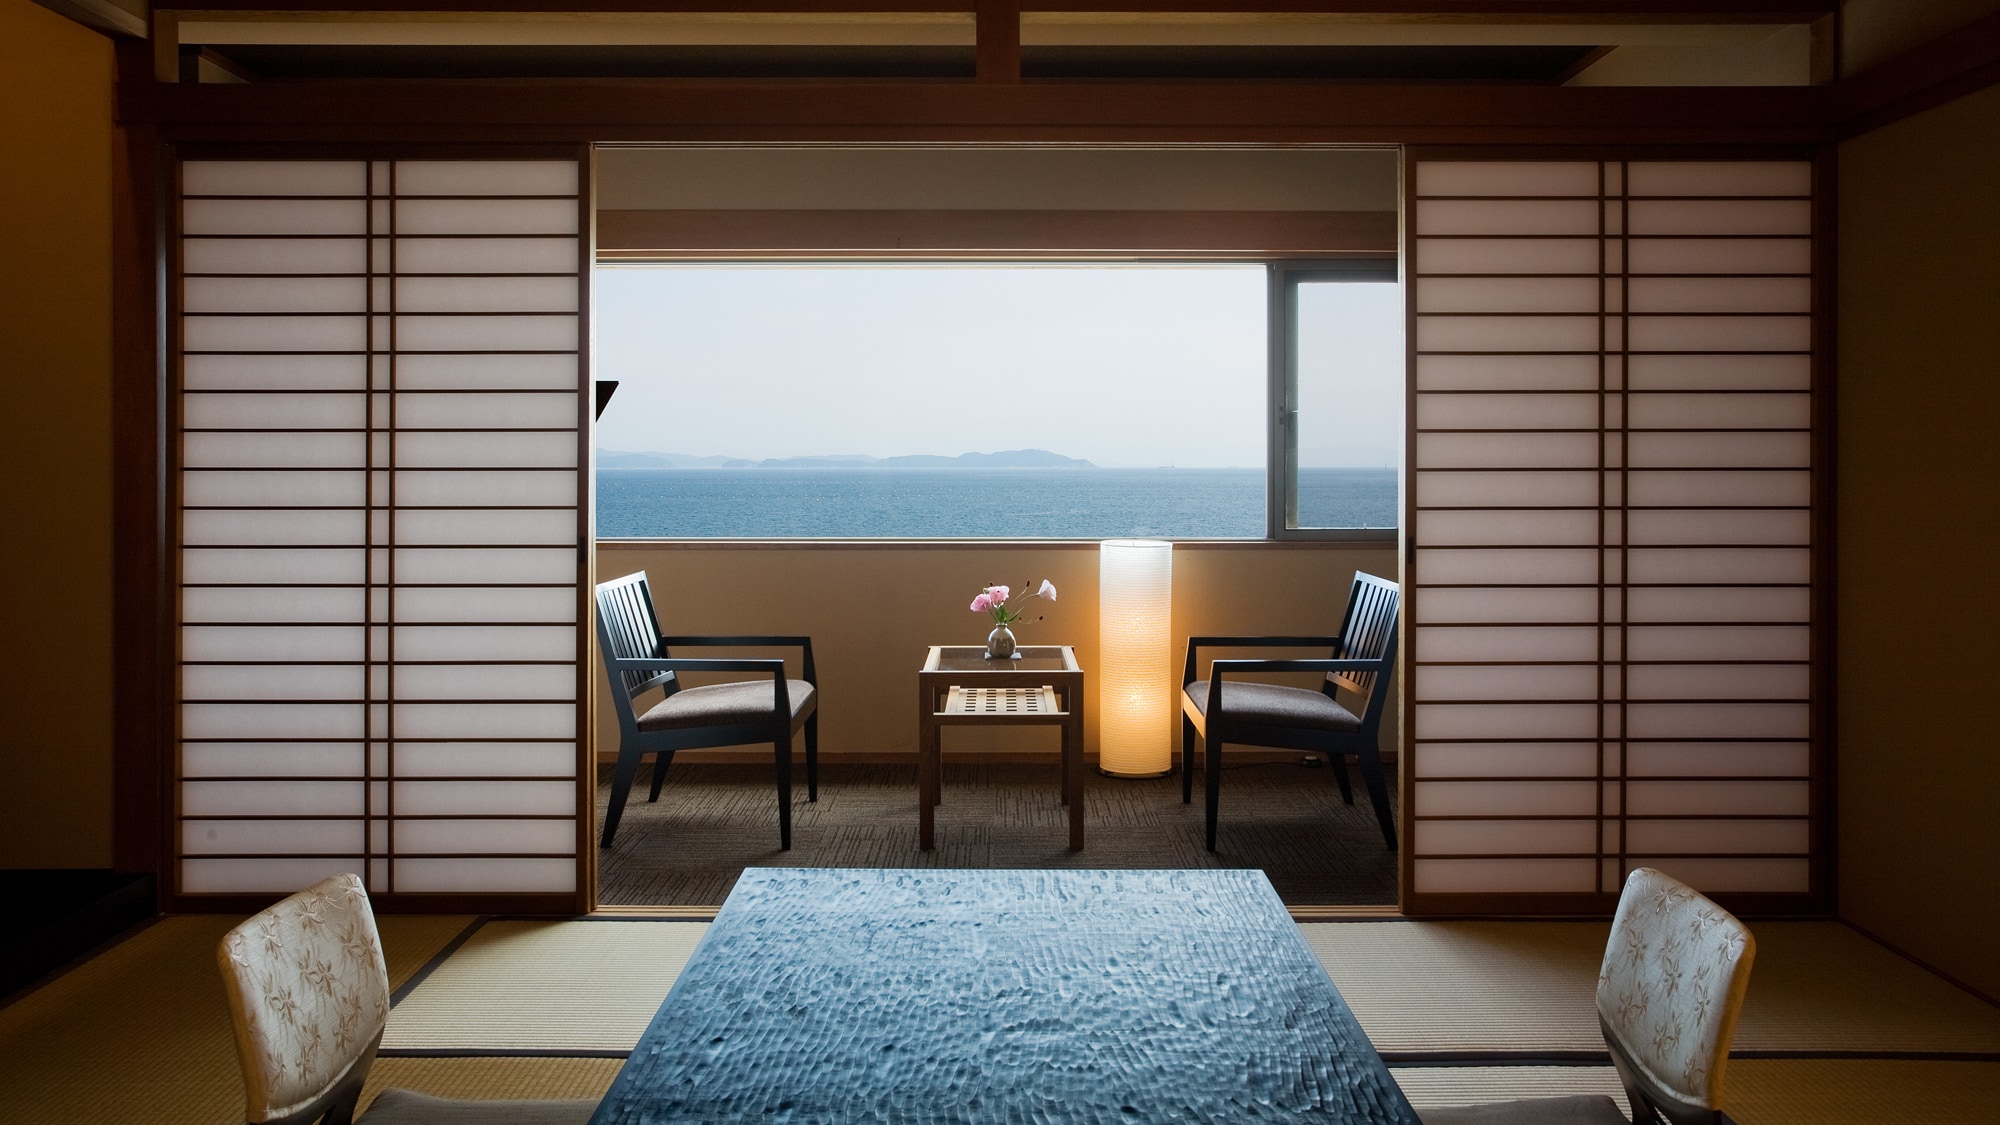 Japanese-style room (5th floor) with an impressive view of the sea